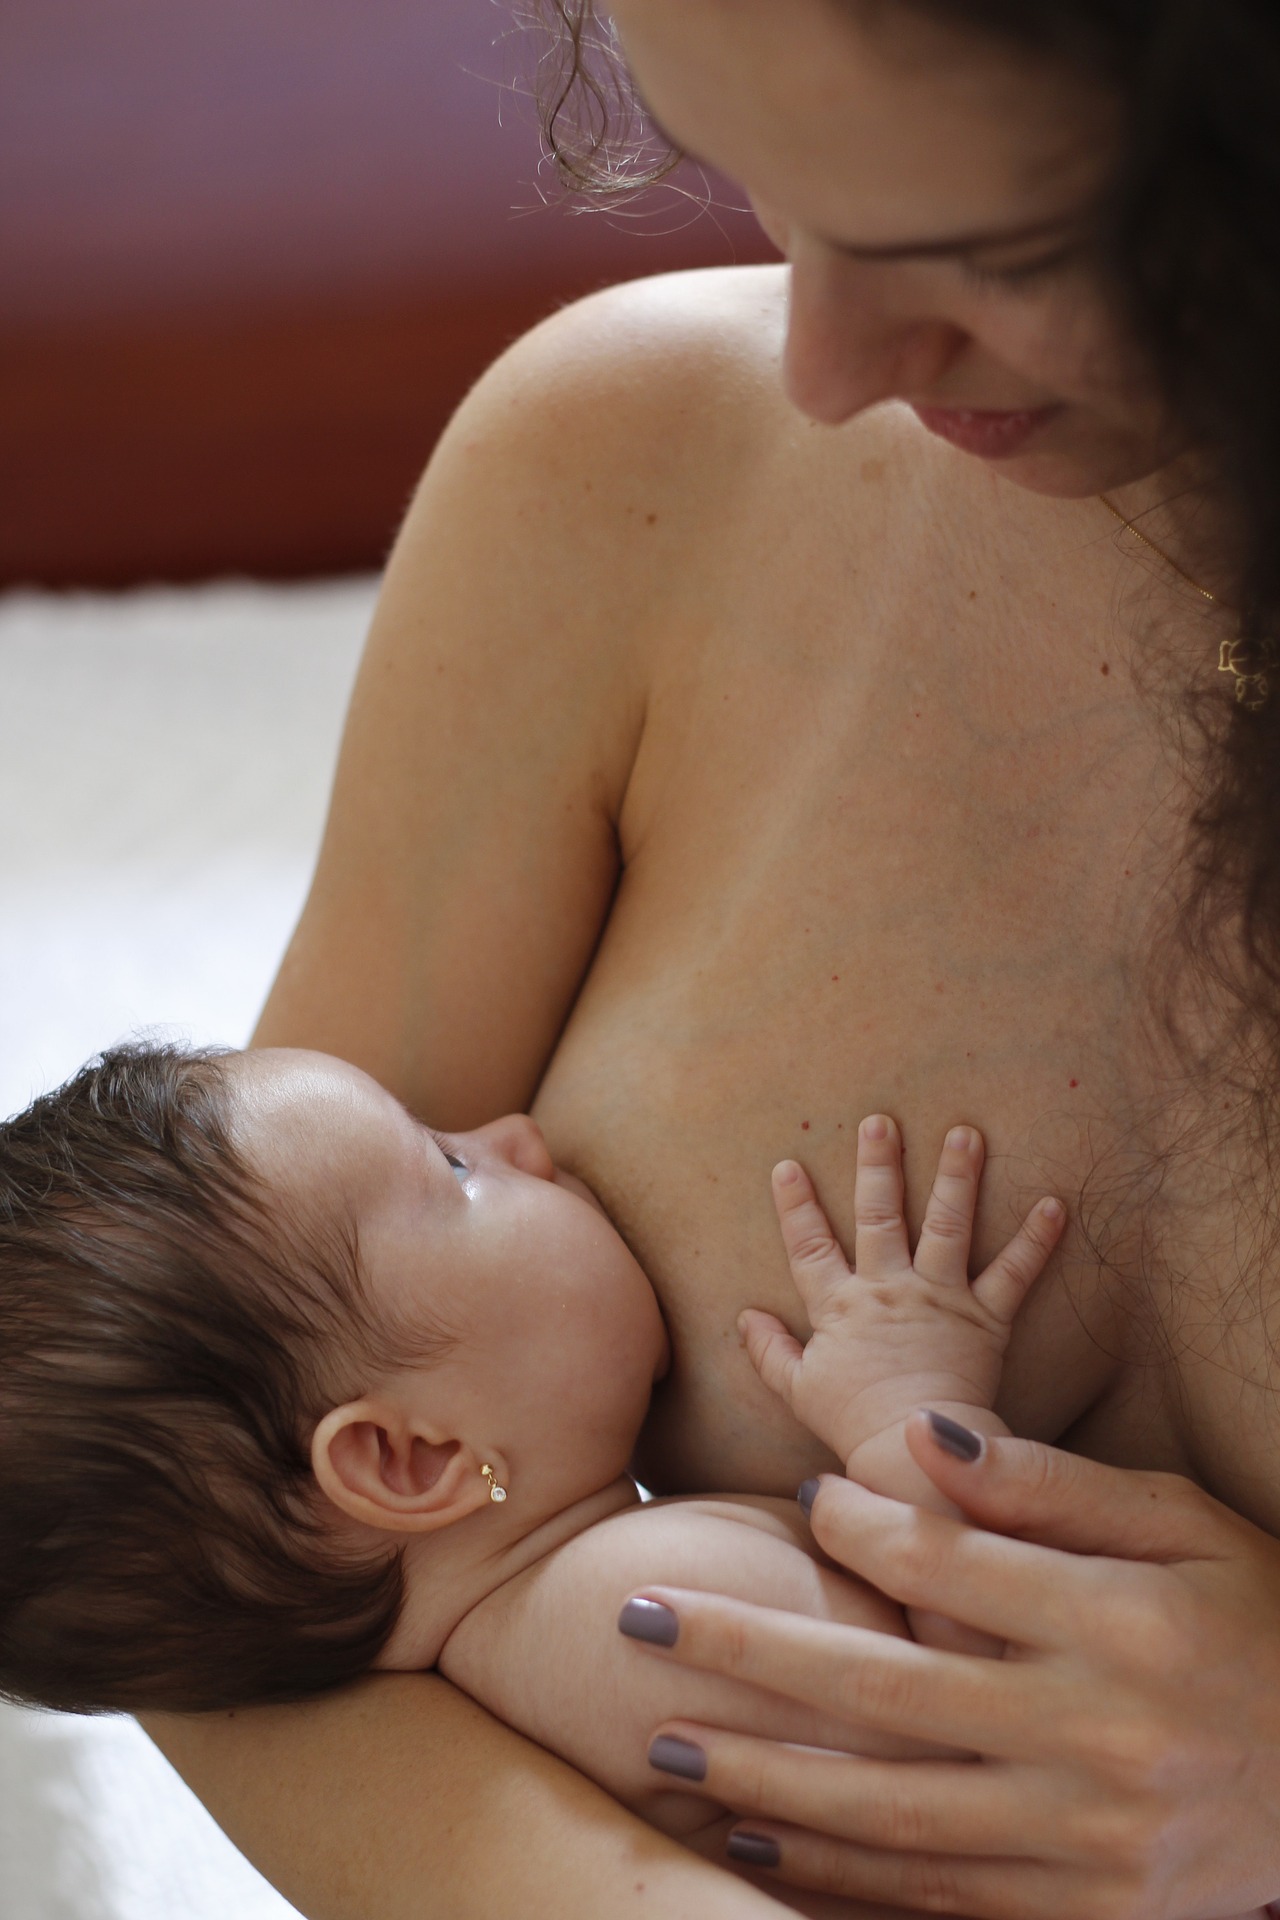 3 in 5 babies not breastfed in the first hour of life - The Good For You Ne...